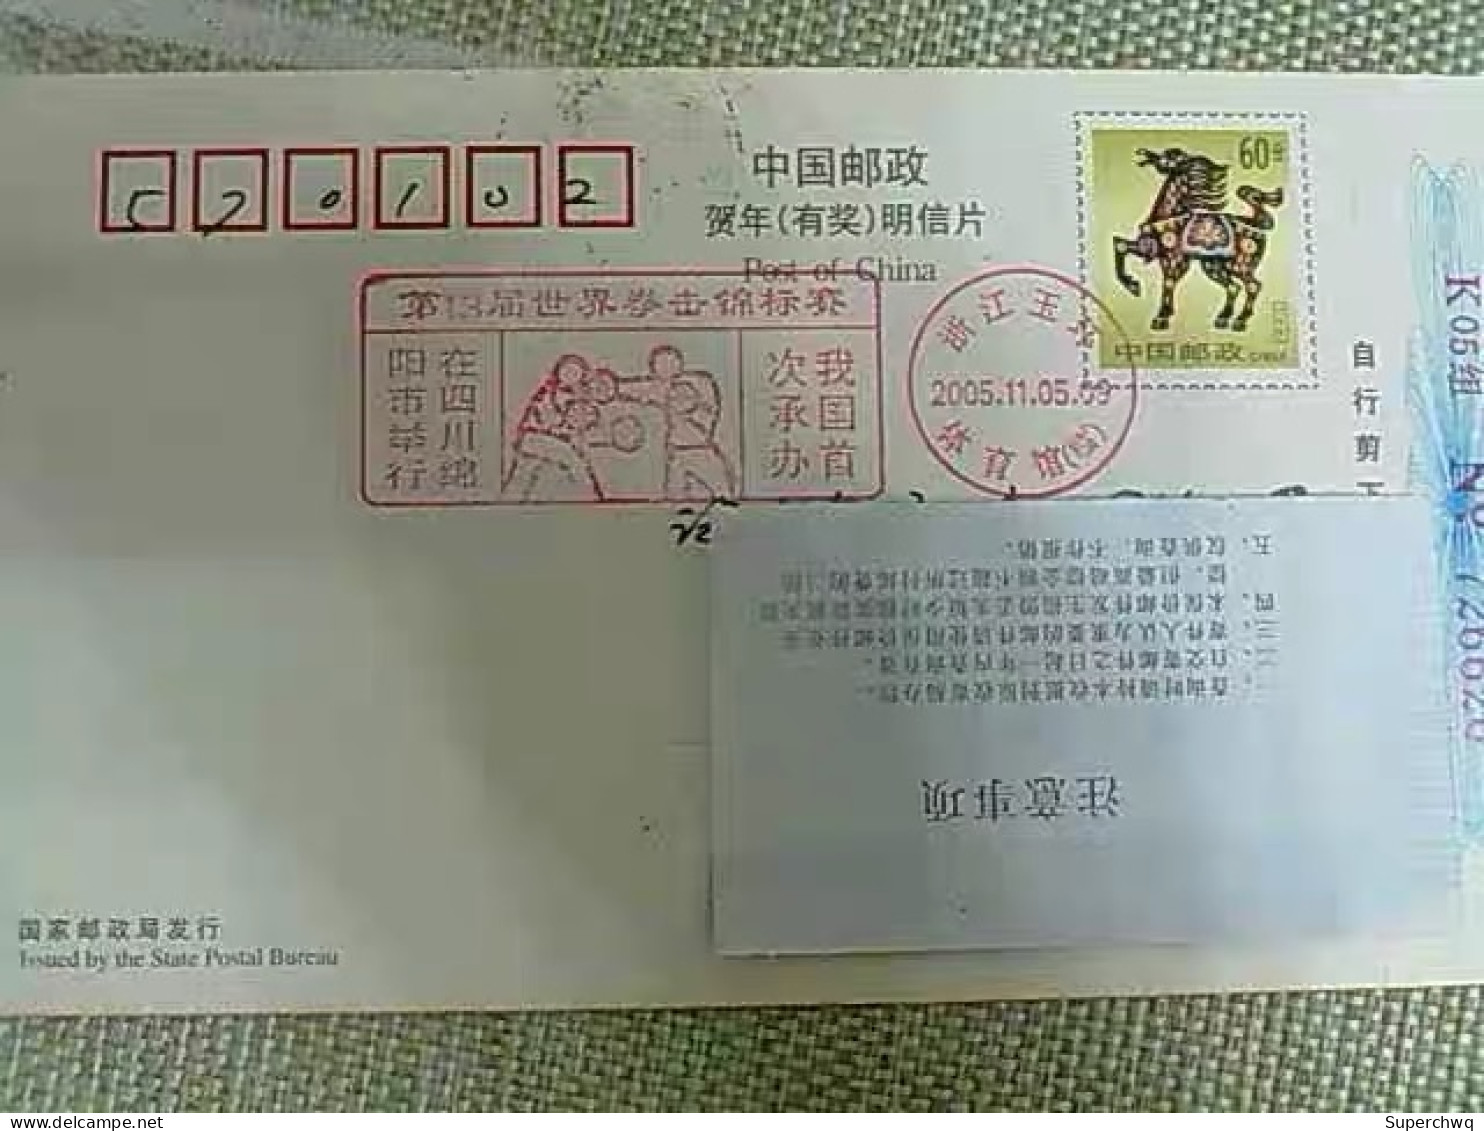 China Posted Postcard，with The 13th World Boxing Championships Mianyang, Sichuan Postmark - Postcards